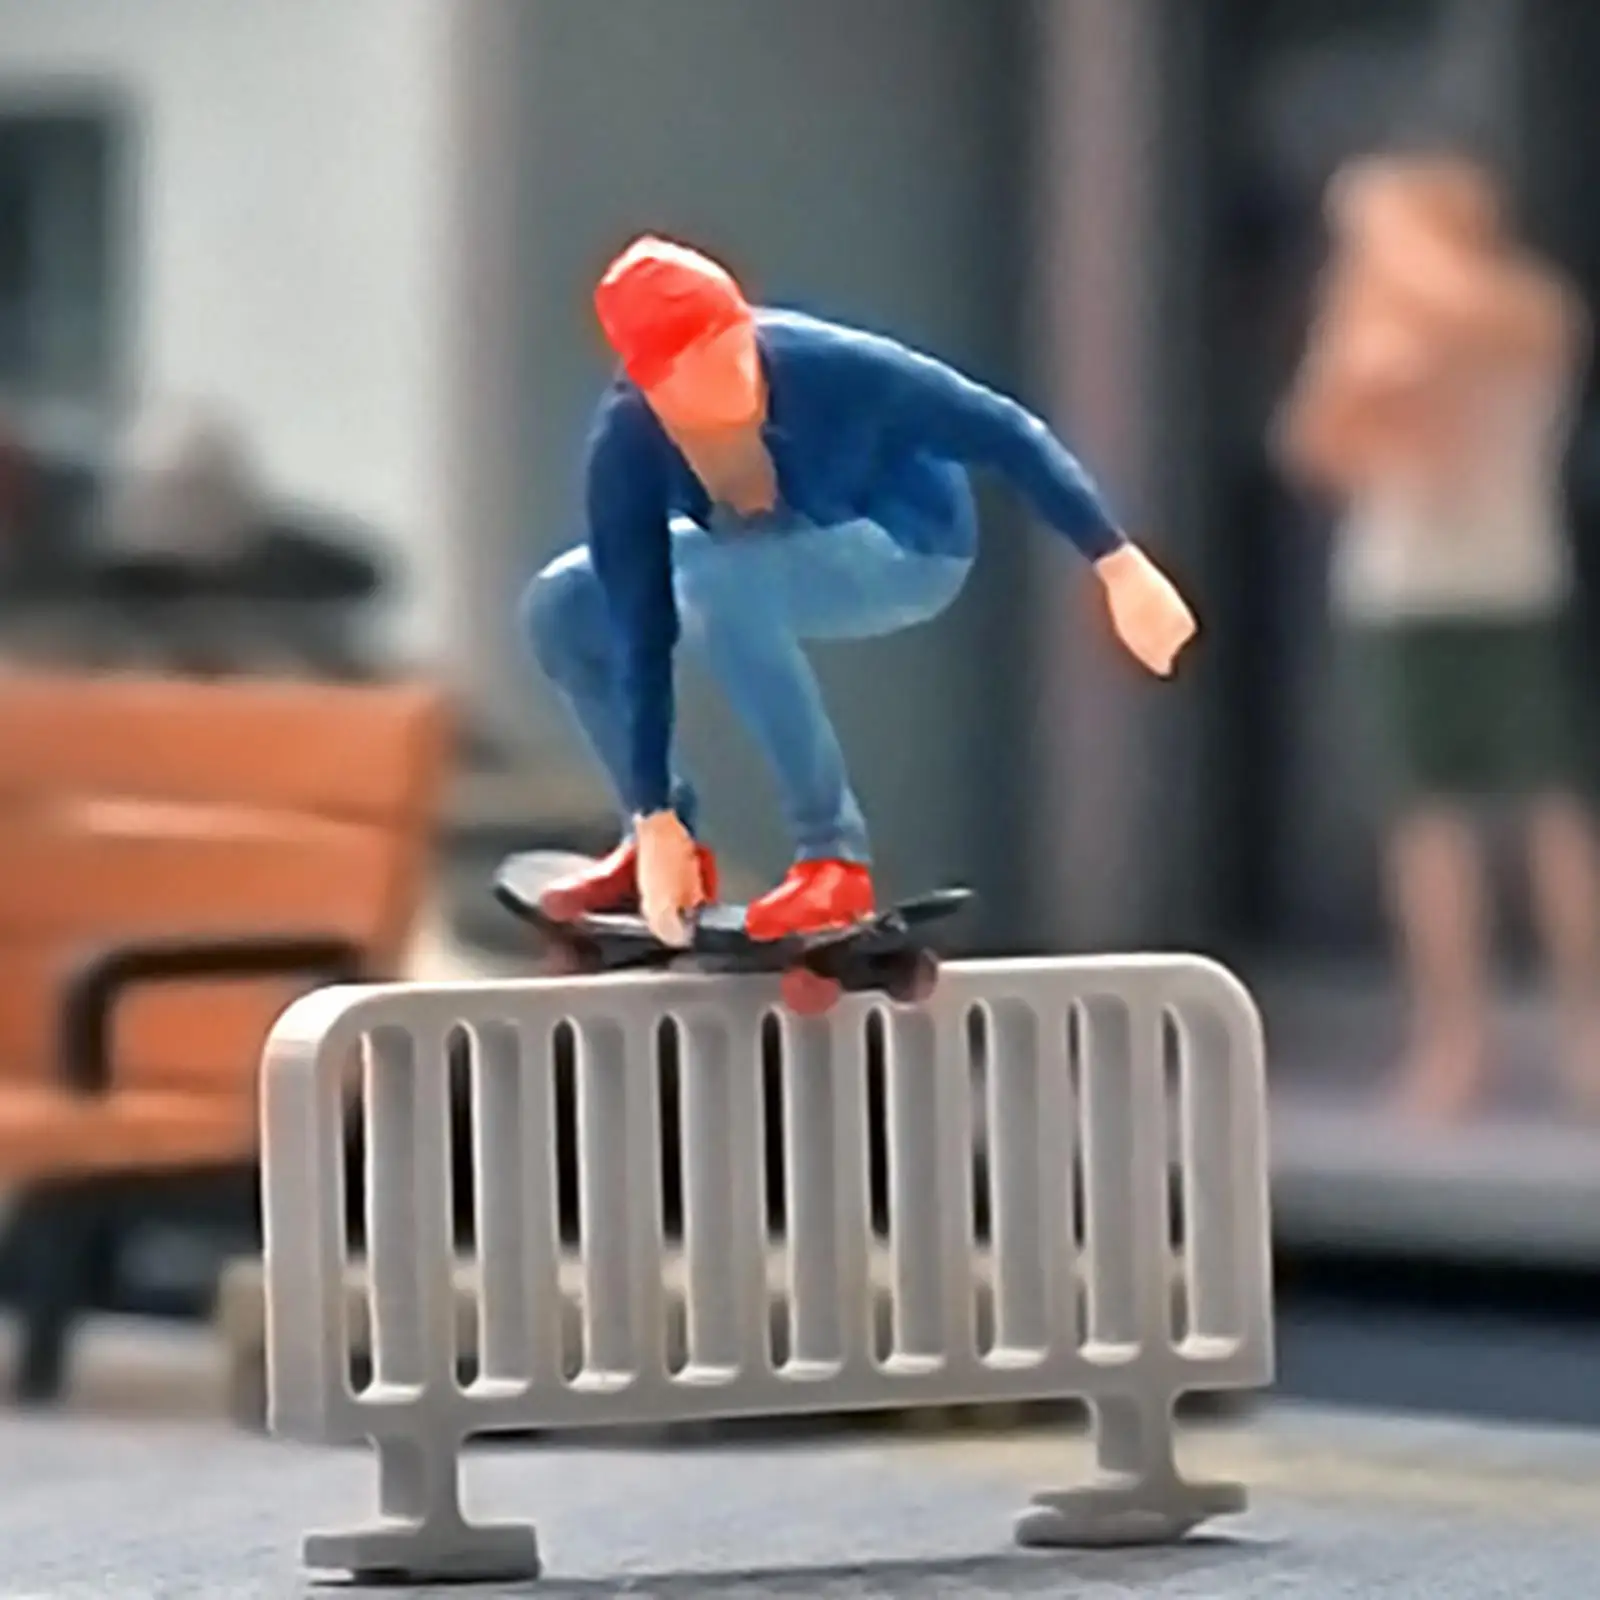 1/64 Miniature Figure Skateboard Man Painted Model Building Kits for Architecture Model Collections DIY Projects Street Railway